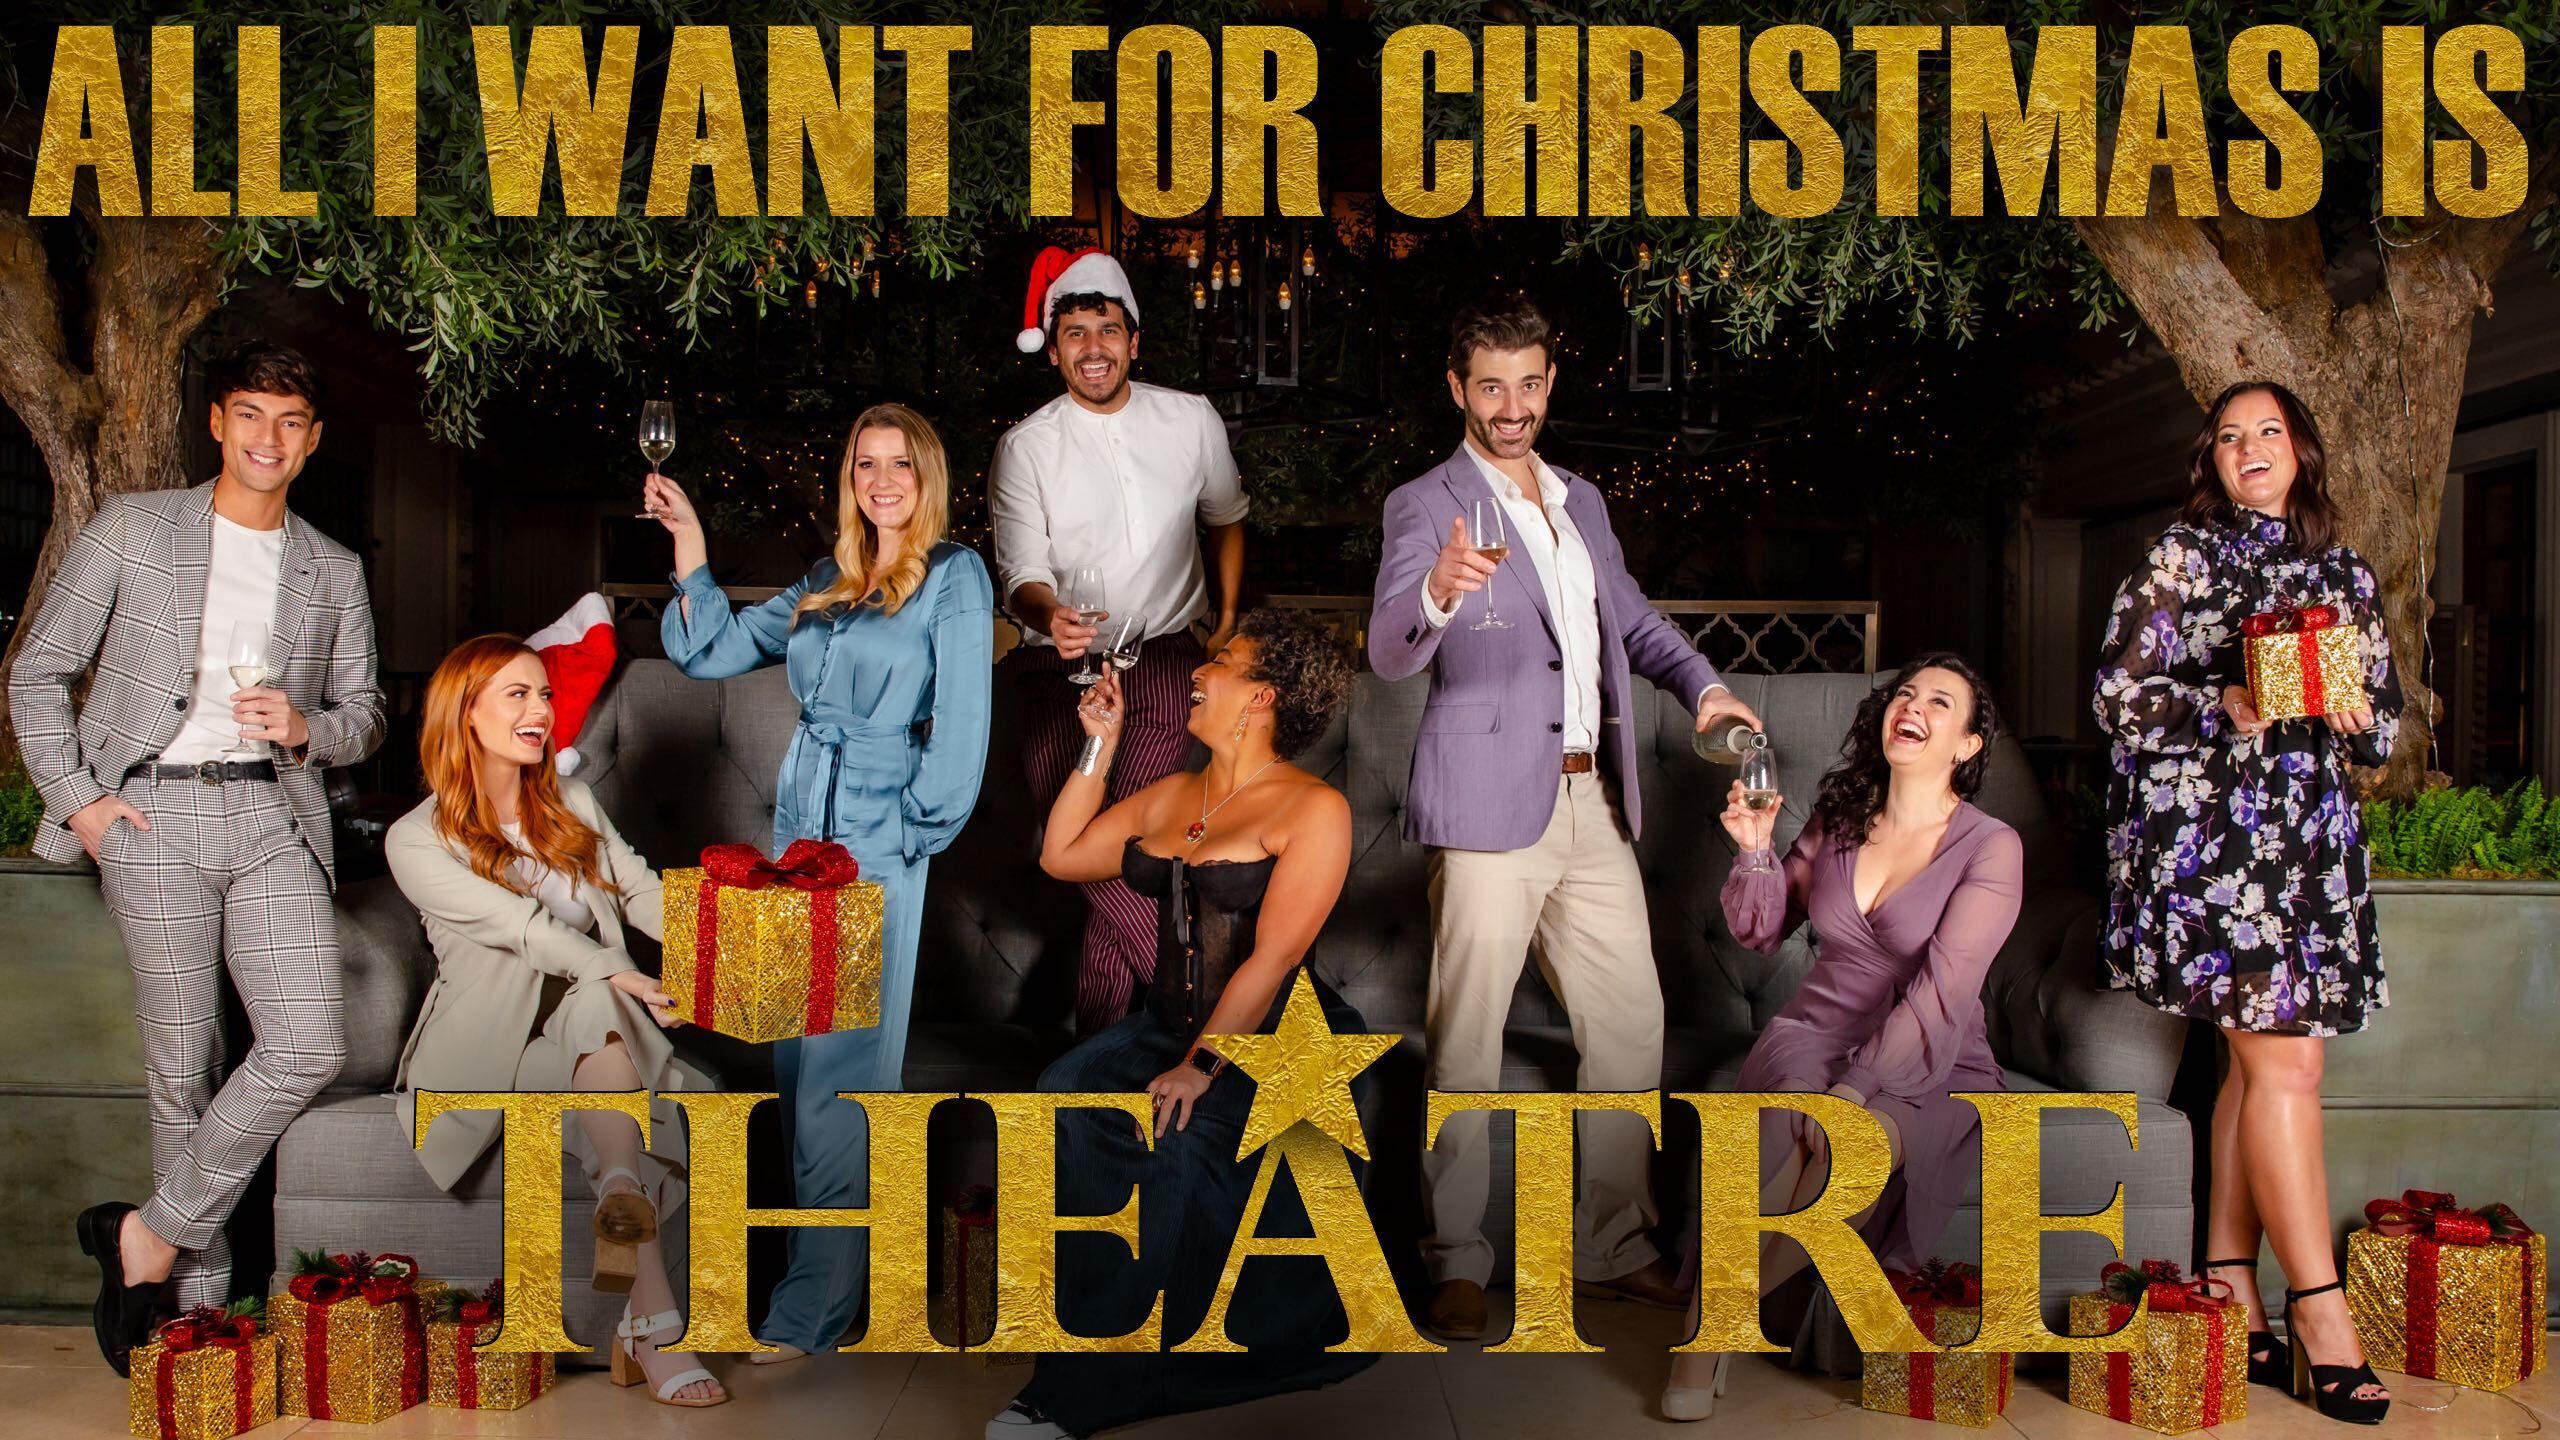 All I Want For Christmas is Theatre 